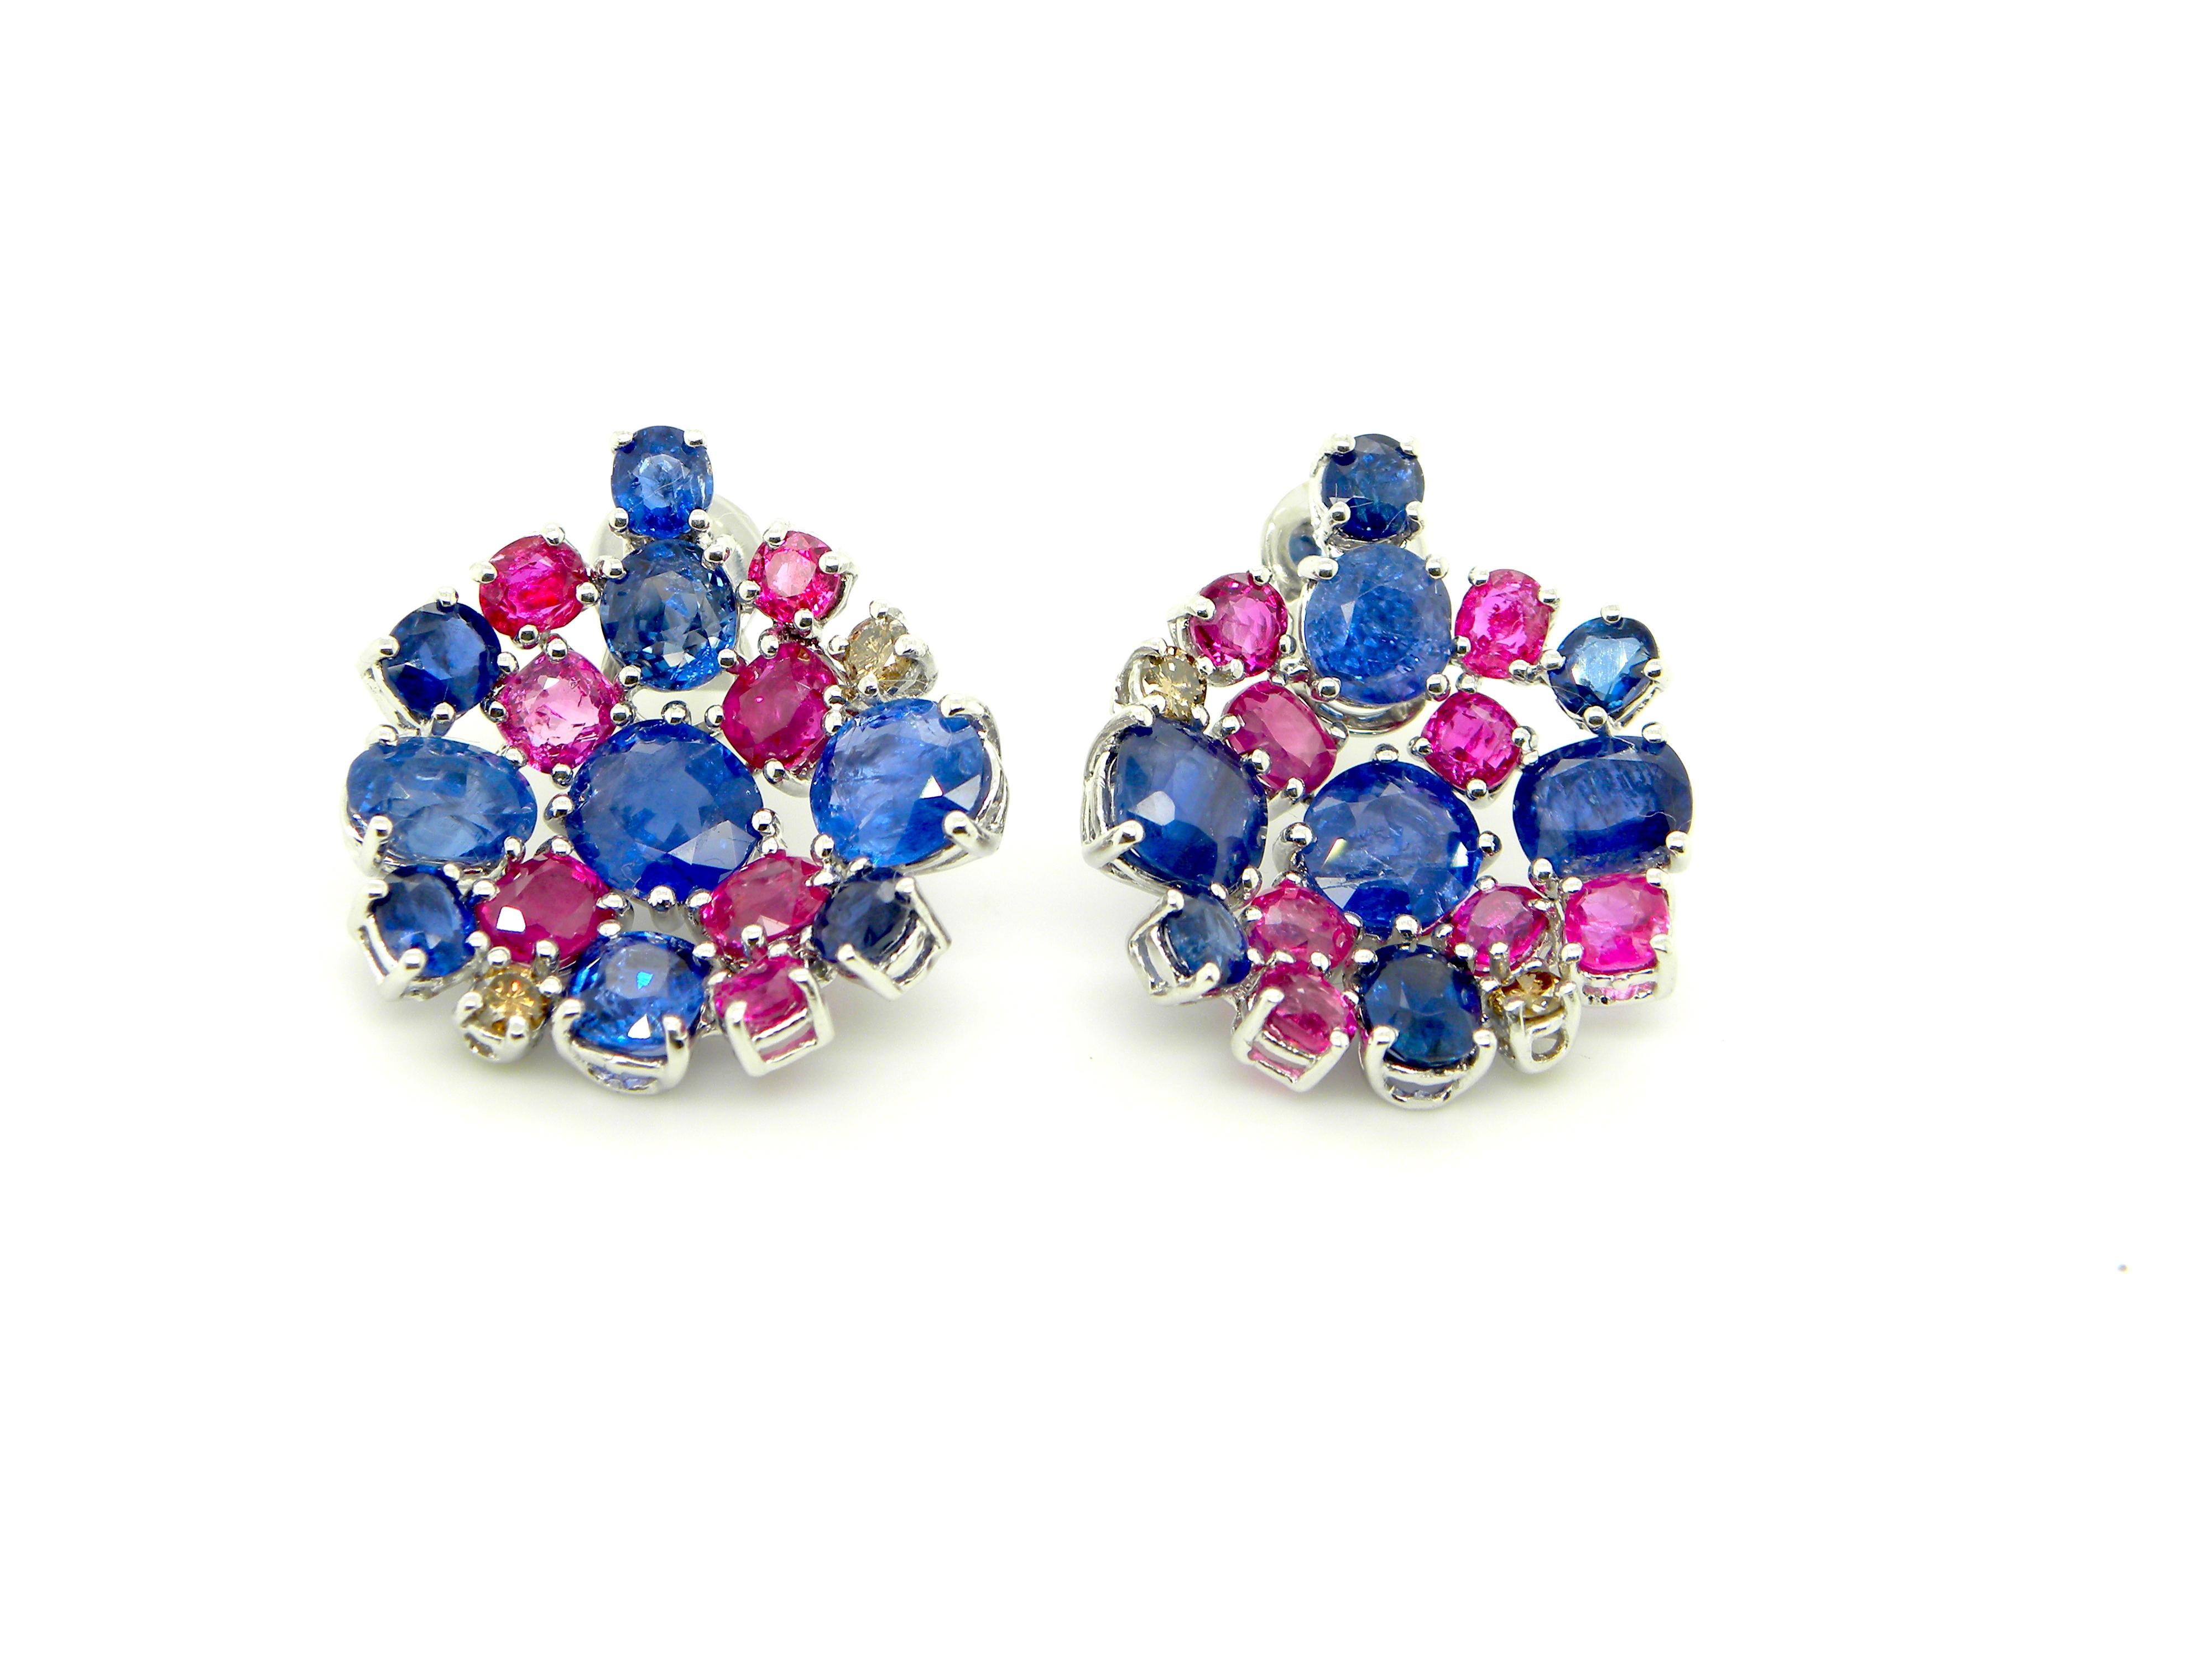 15.4 Carat Unheated Burmese Ruby and Blue Sapphire White Gold Cluster Earrings: 

An elegant pair of earrings, it features numerous unheated Burmese rubies and blue sapphires weighing a total of 15.4 carat with interspersed brown diamonds weighing a